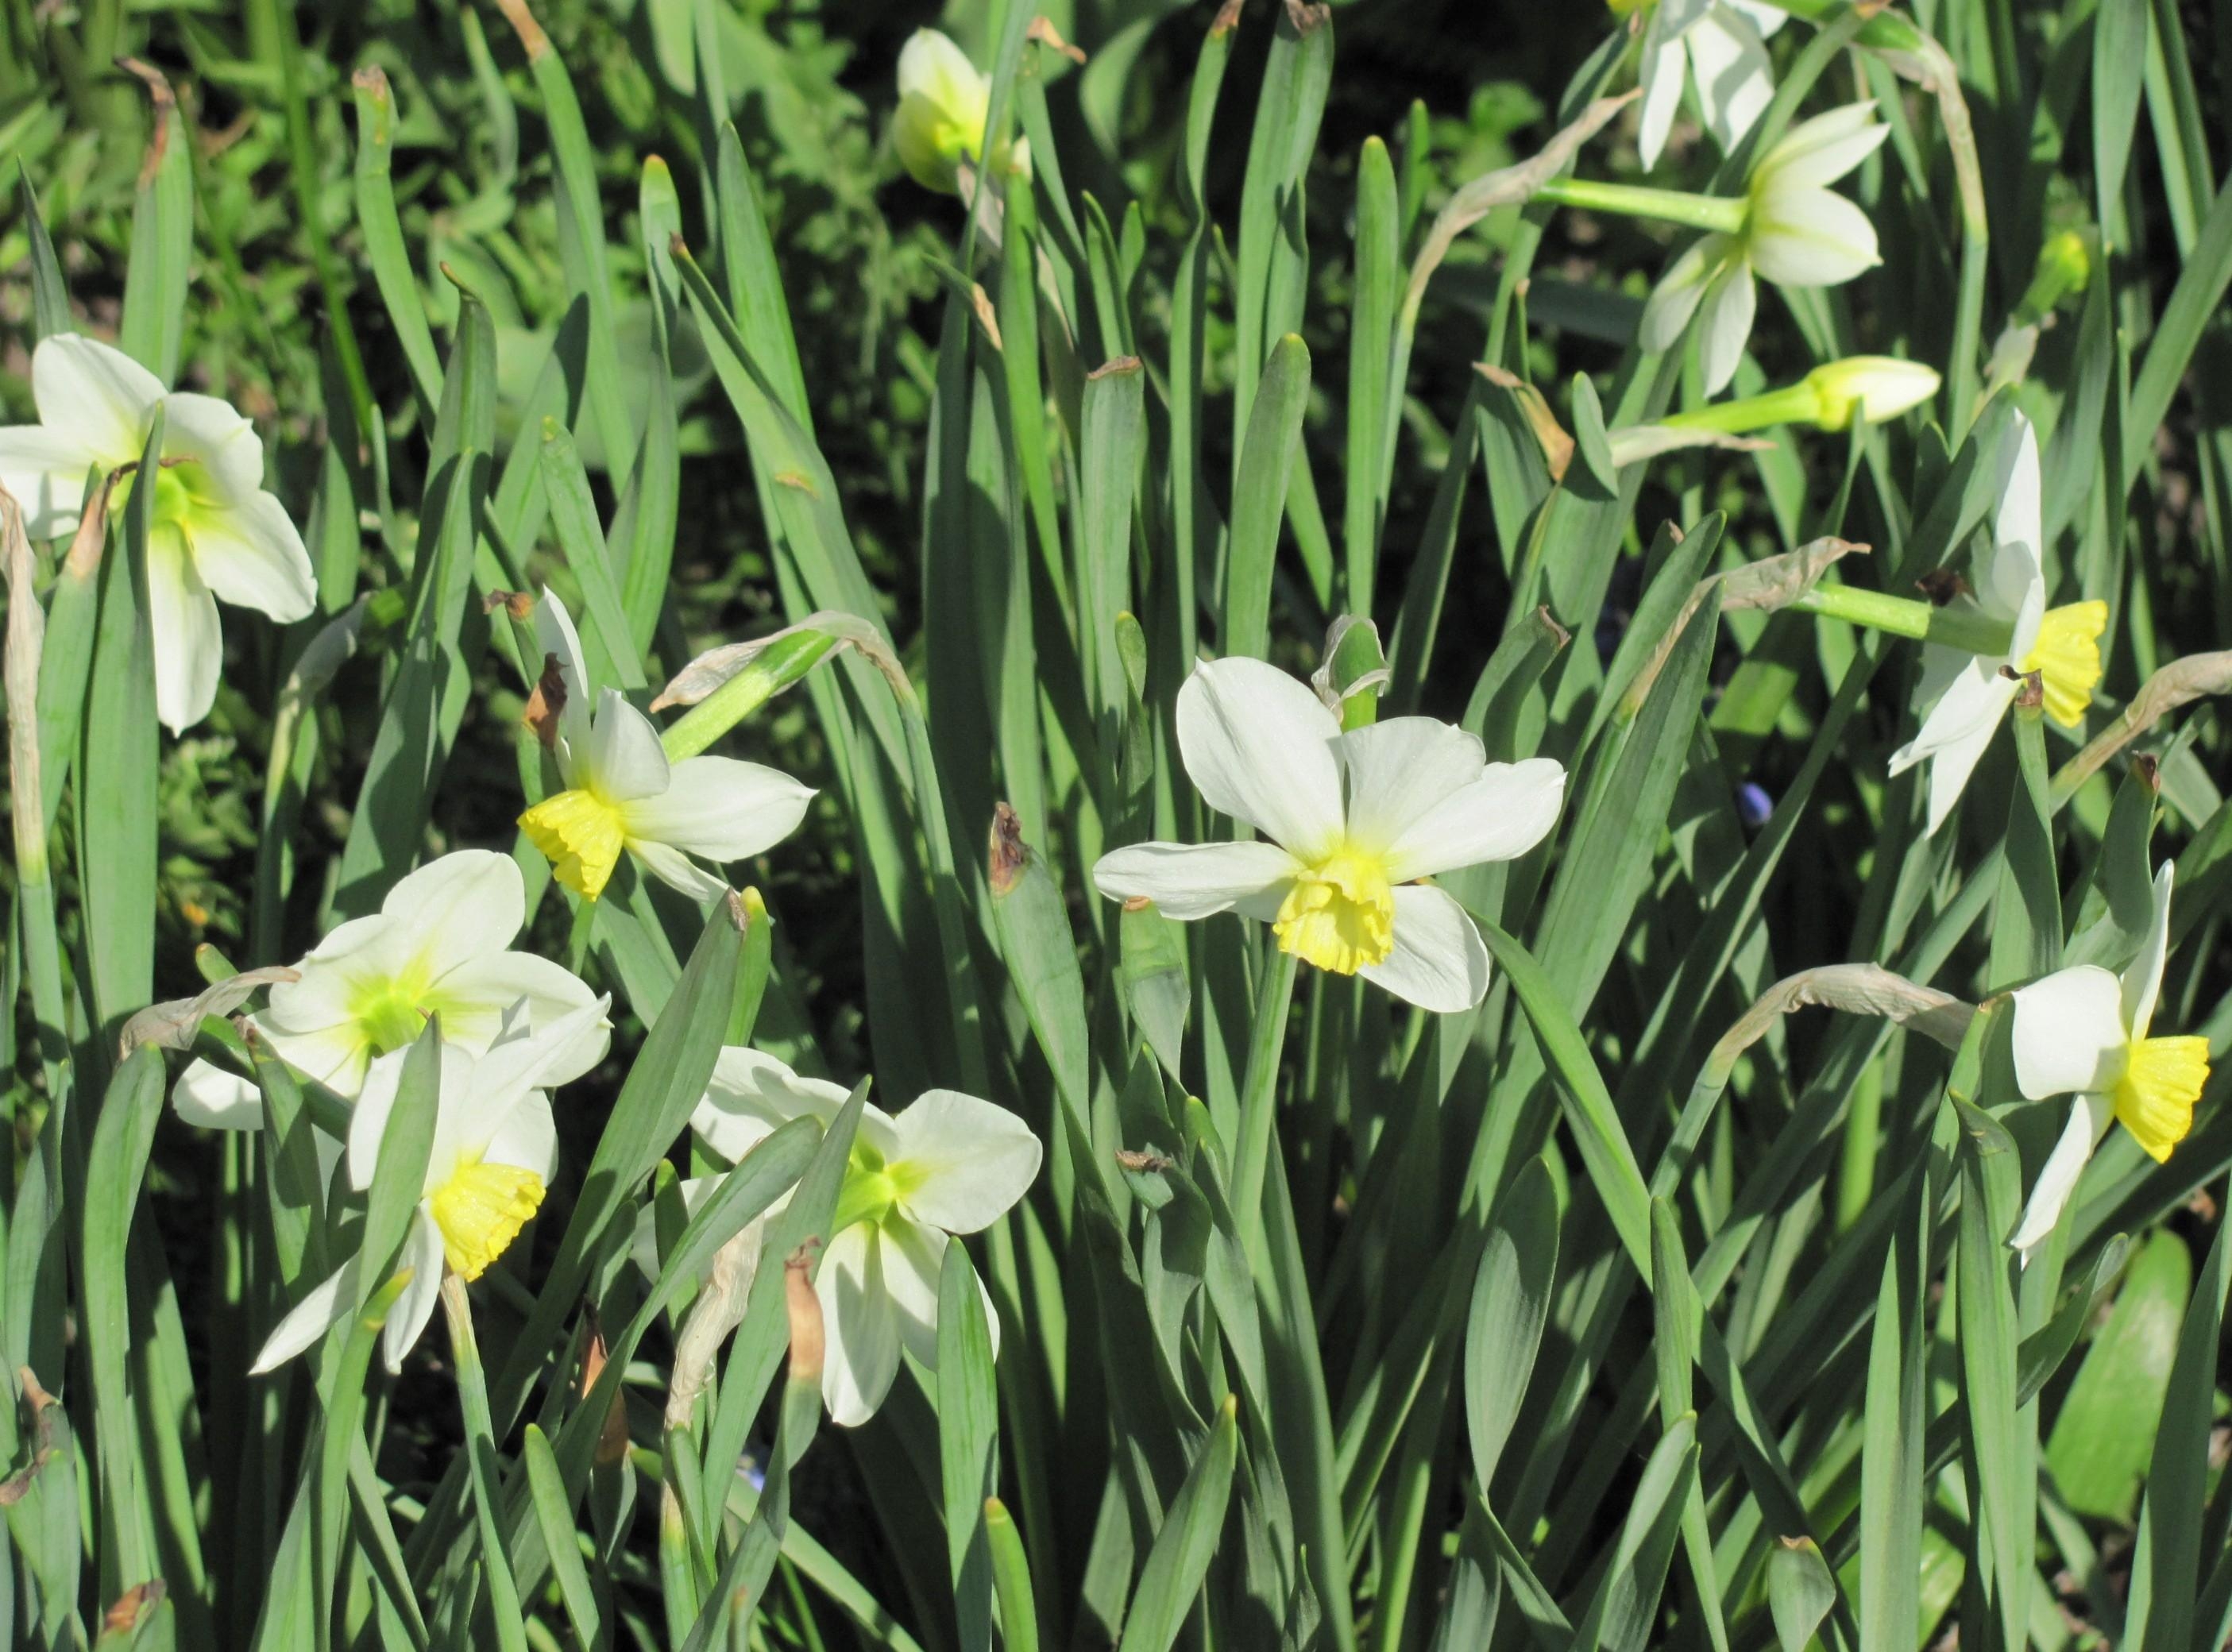 Popular Narcissussi Image for Phone